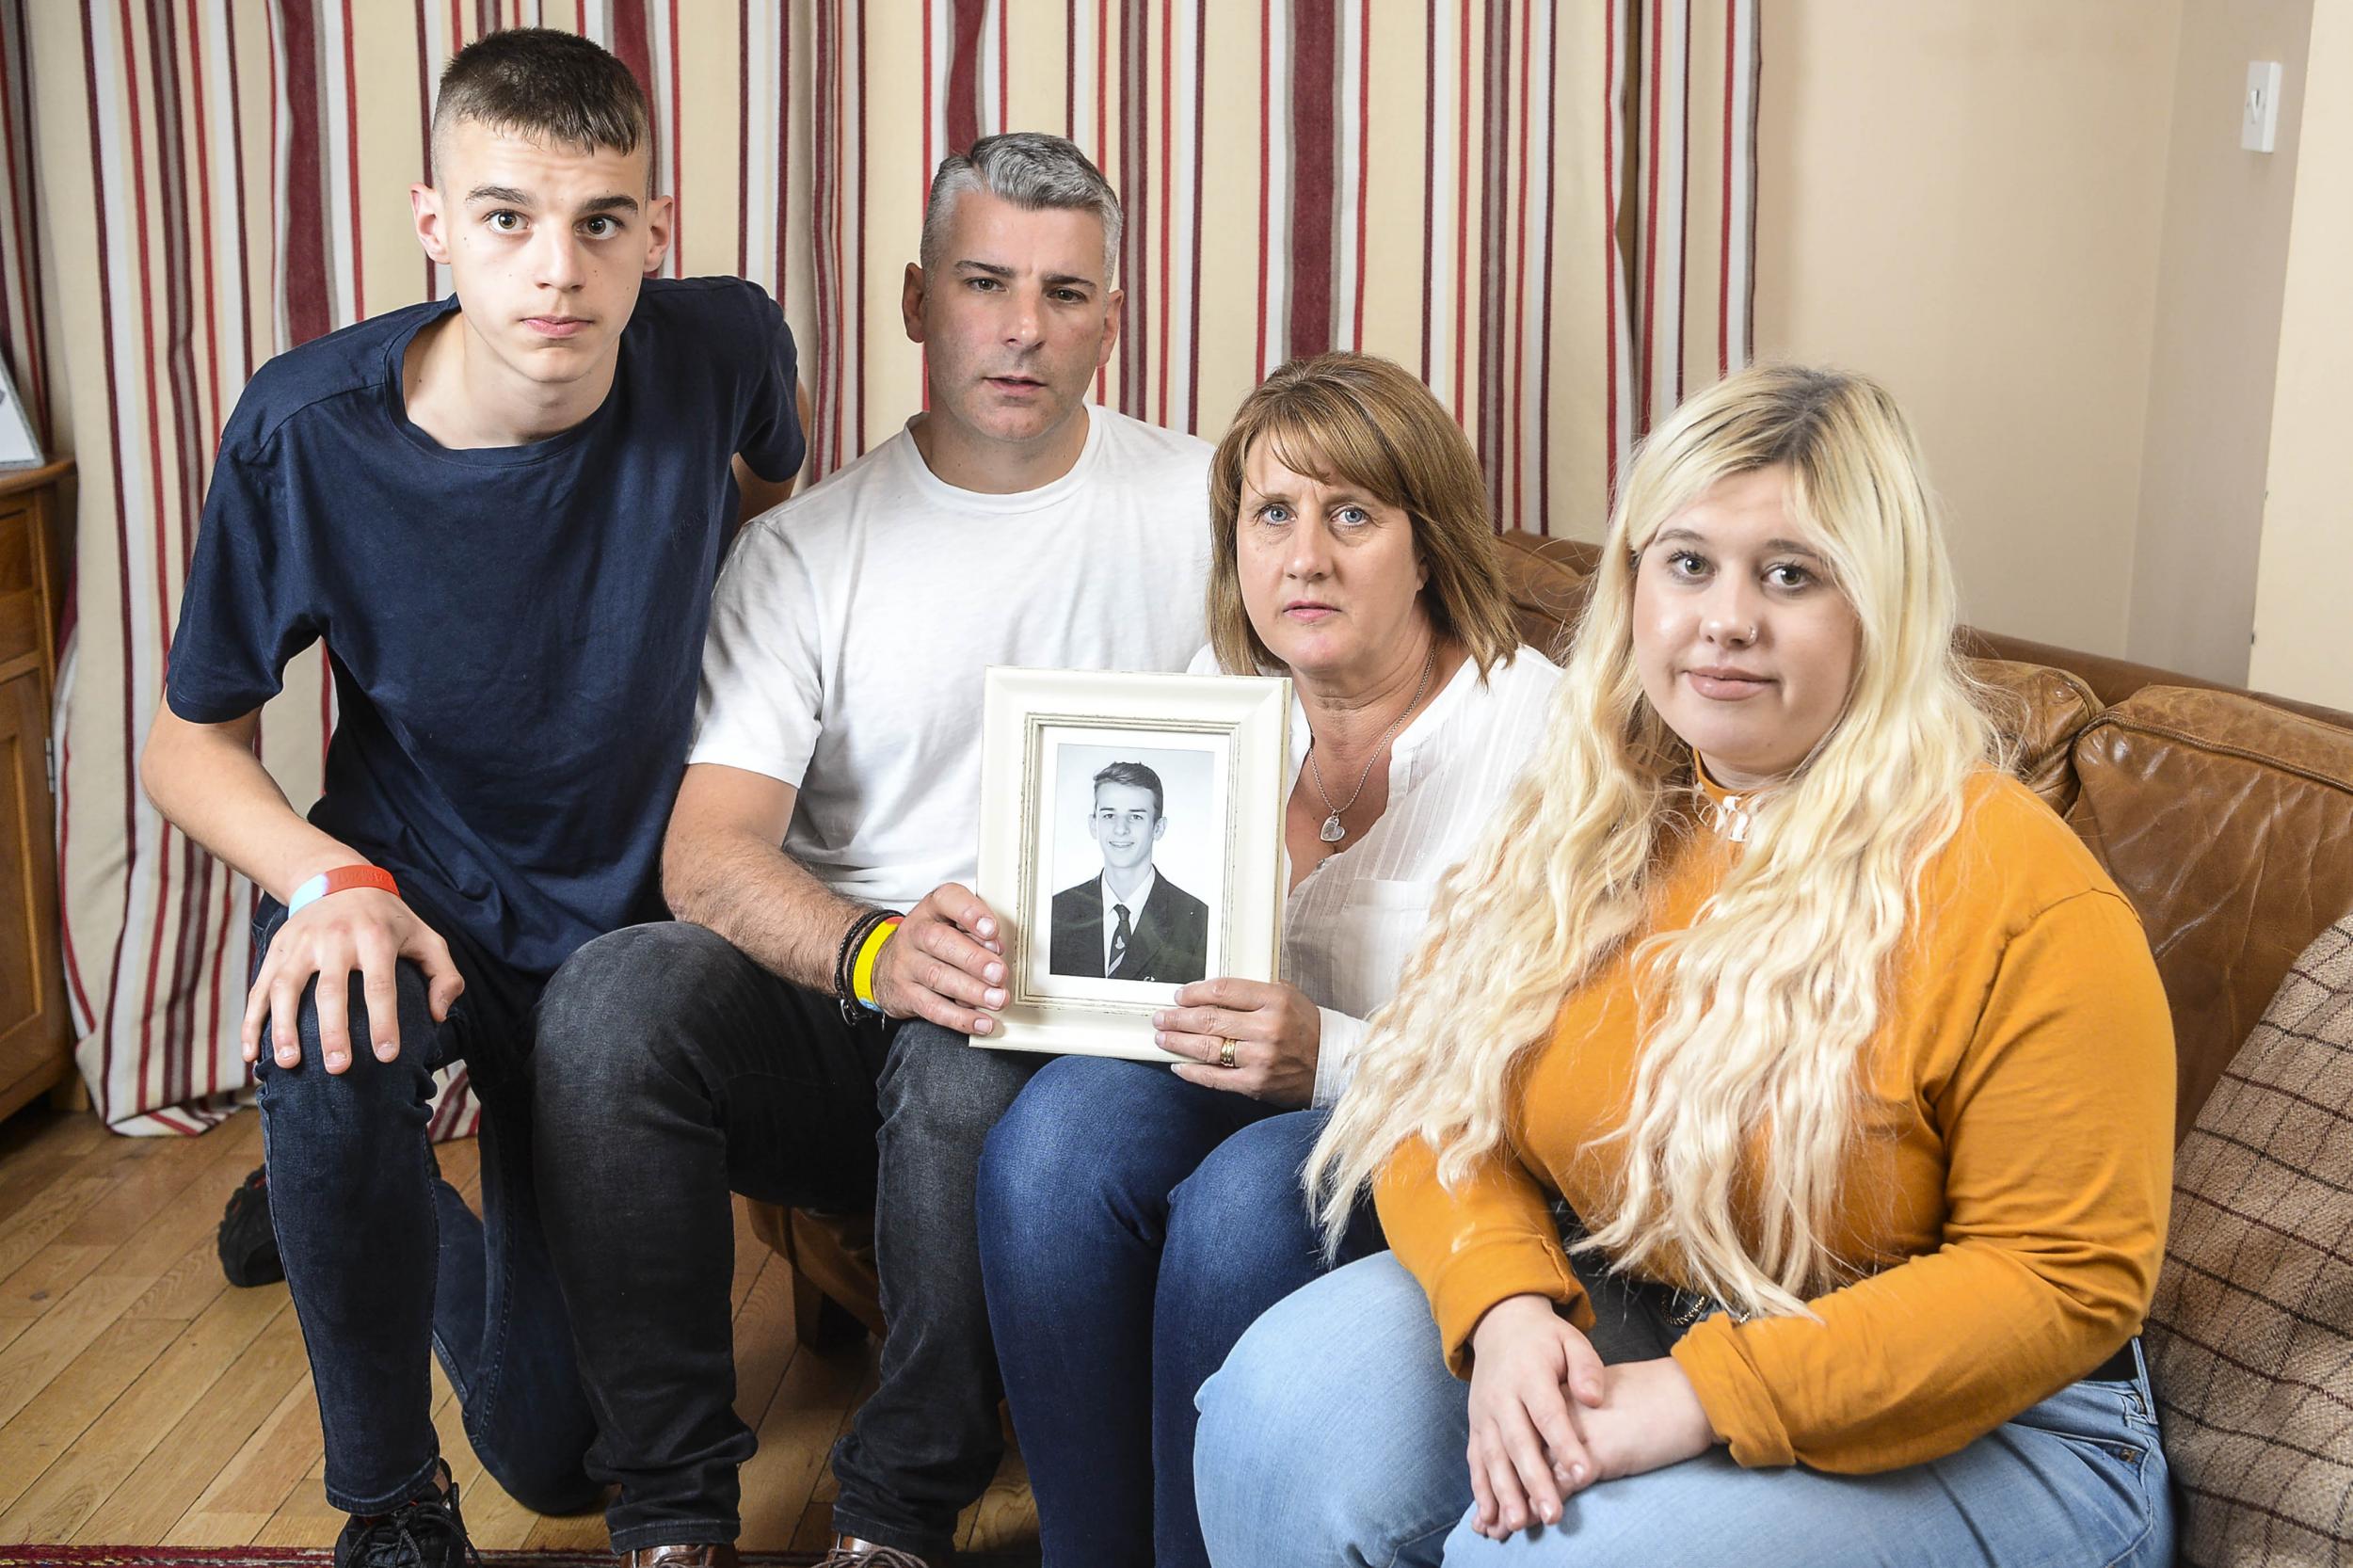 Joe Dale's parents Jon and Helena and siblings Matthew and Abbie Dale want to raise awareness of the dangers of asthma